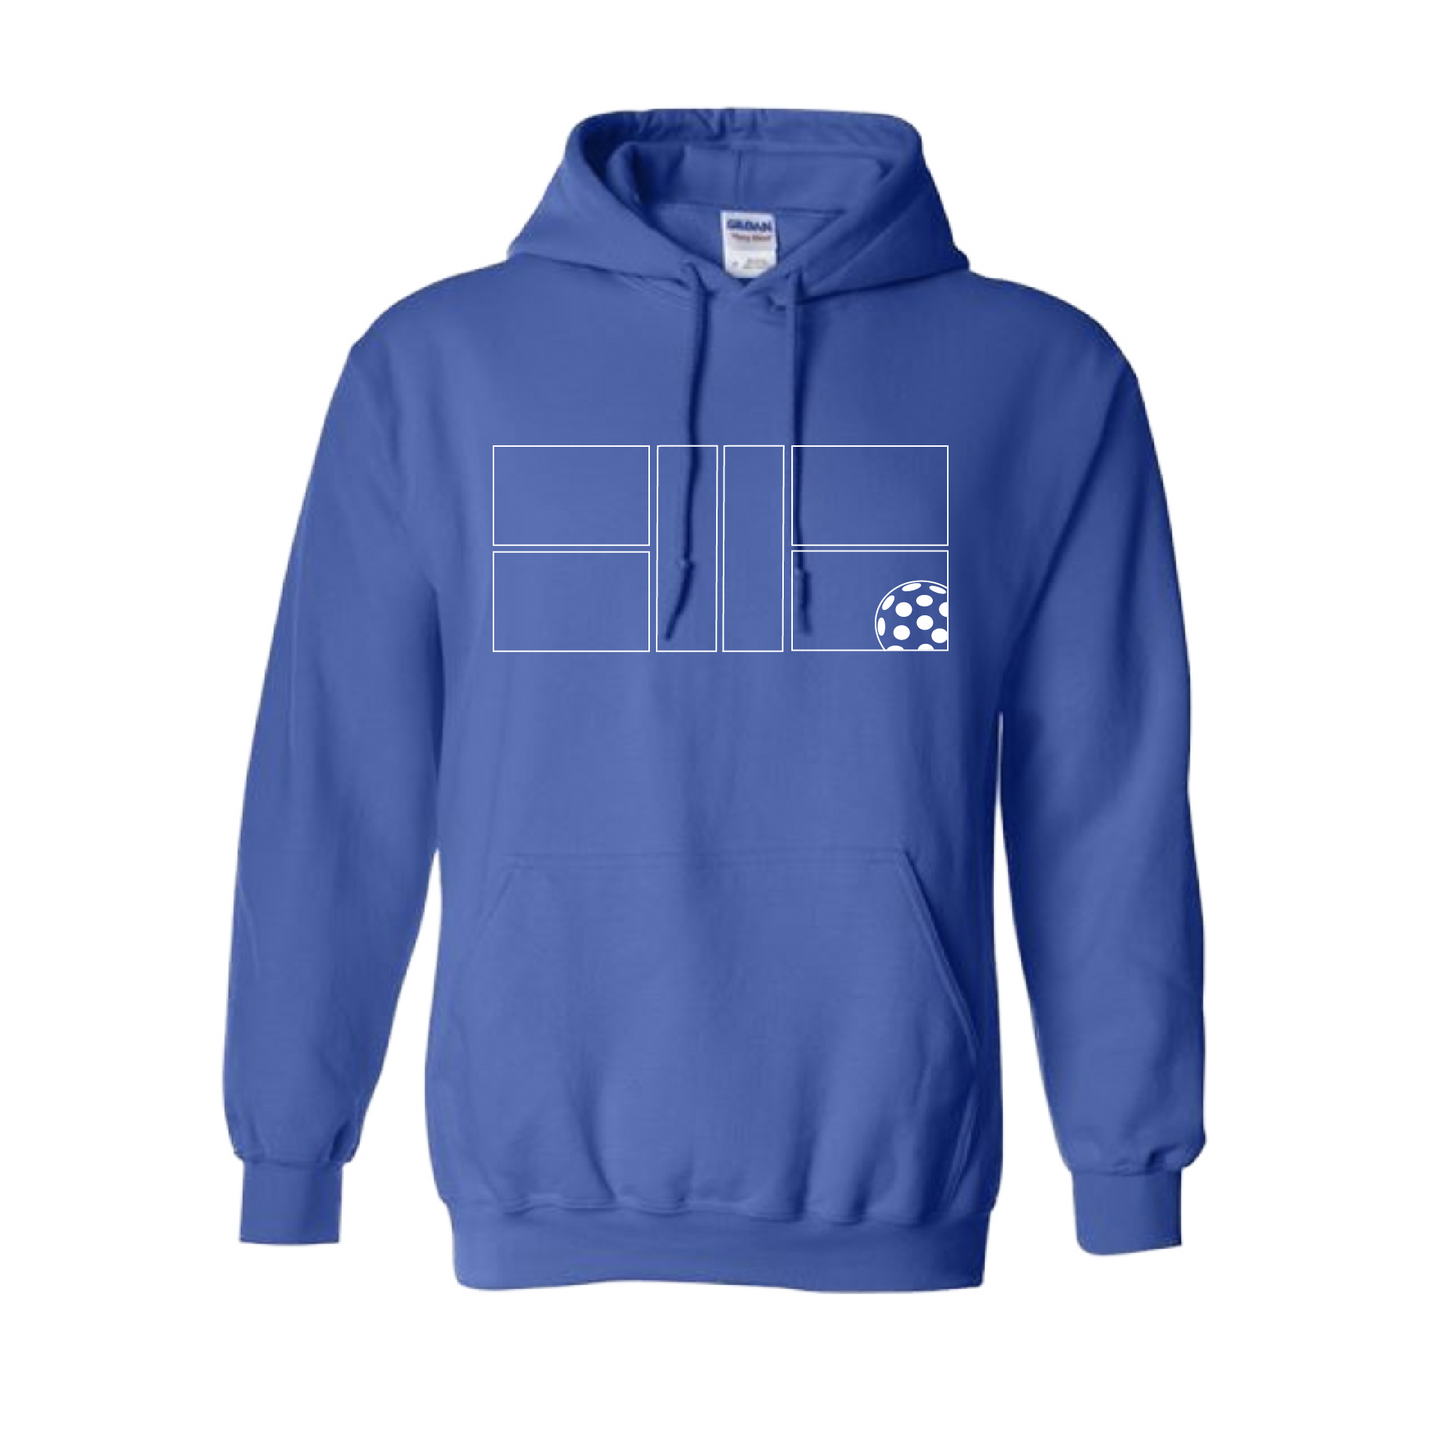 Pickleball Design: Pickleball Court with Pickleball  Unisex Hooded Sweatshirt: Moisture-wicking, double-lined hood, front pouch pocket.  This unisex hooded sweatshirt is ultra comfortable and soft. Stay warm on the Pickleball courts while being that hit with this one of kind design.